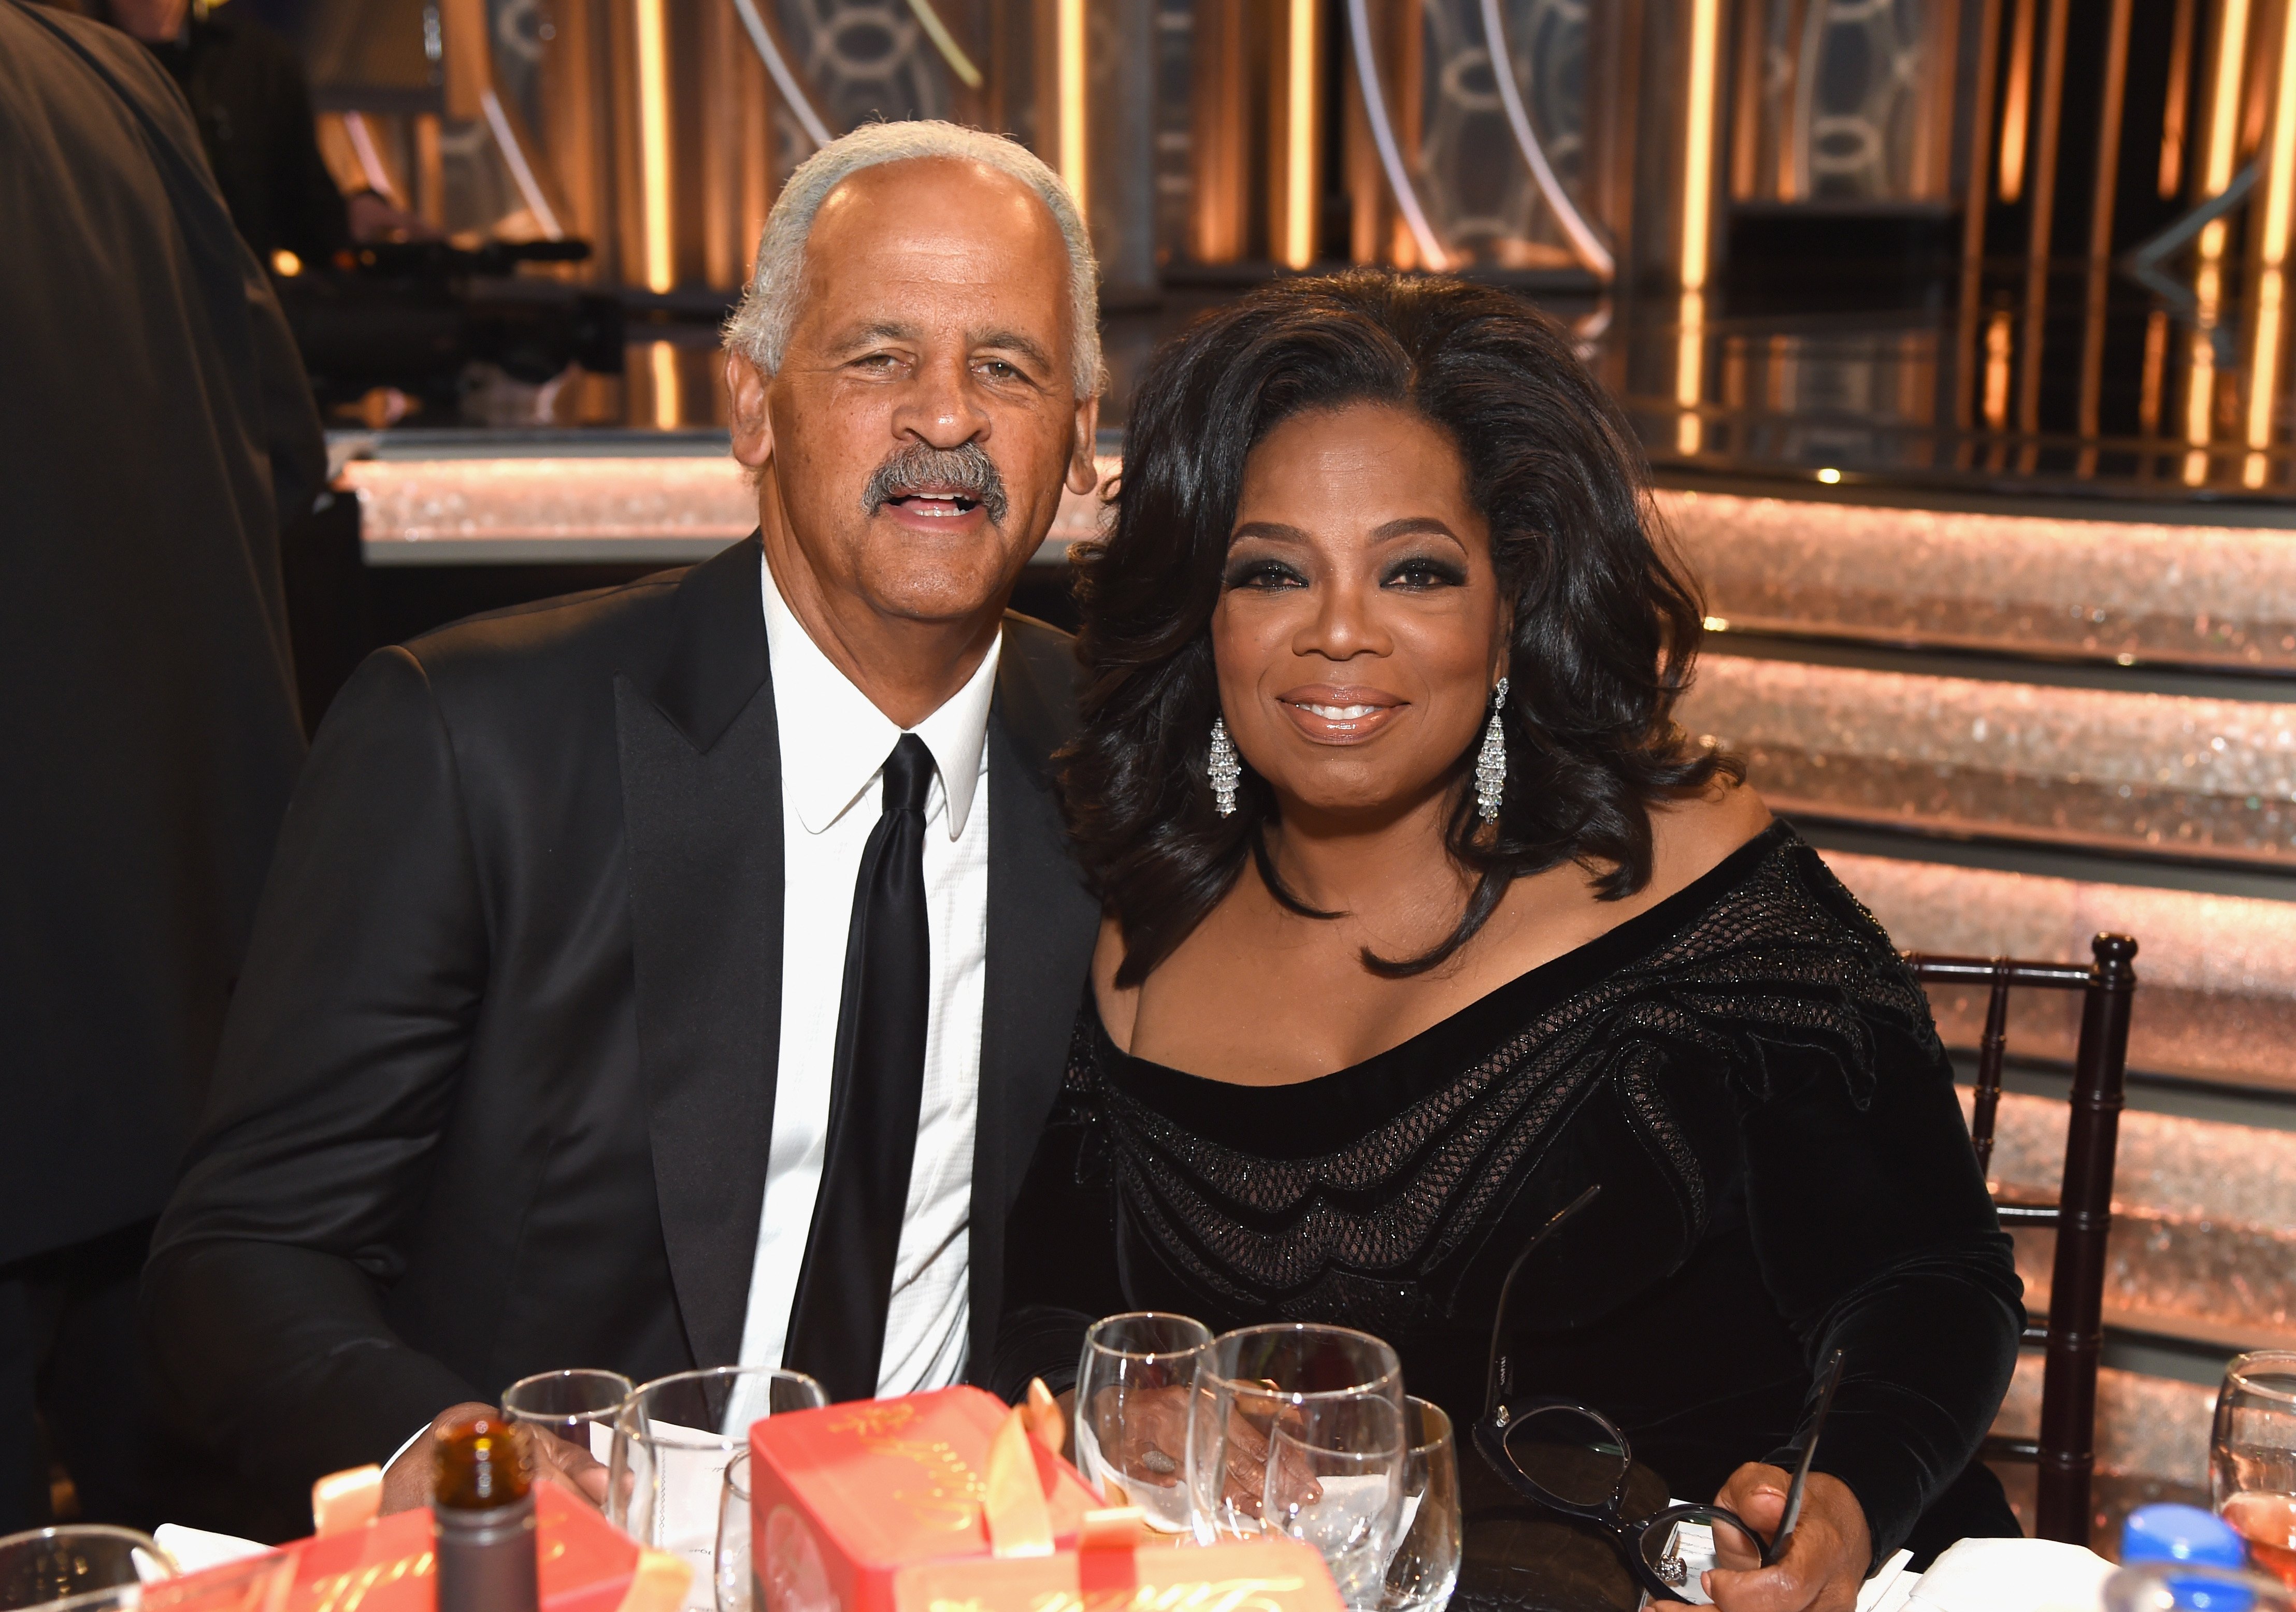 Stedman Graham and Oprah Winfrey. | Source: Getty Images